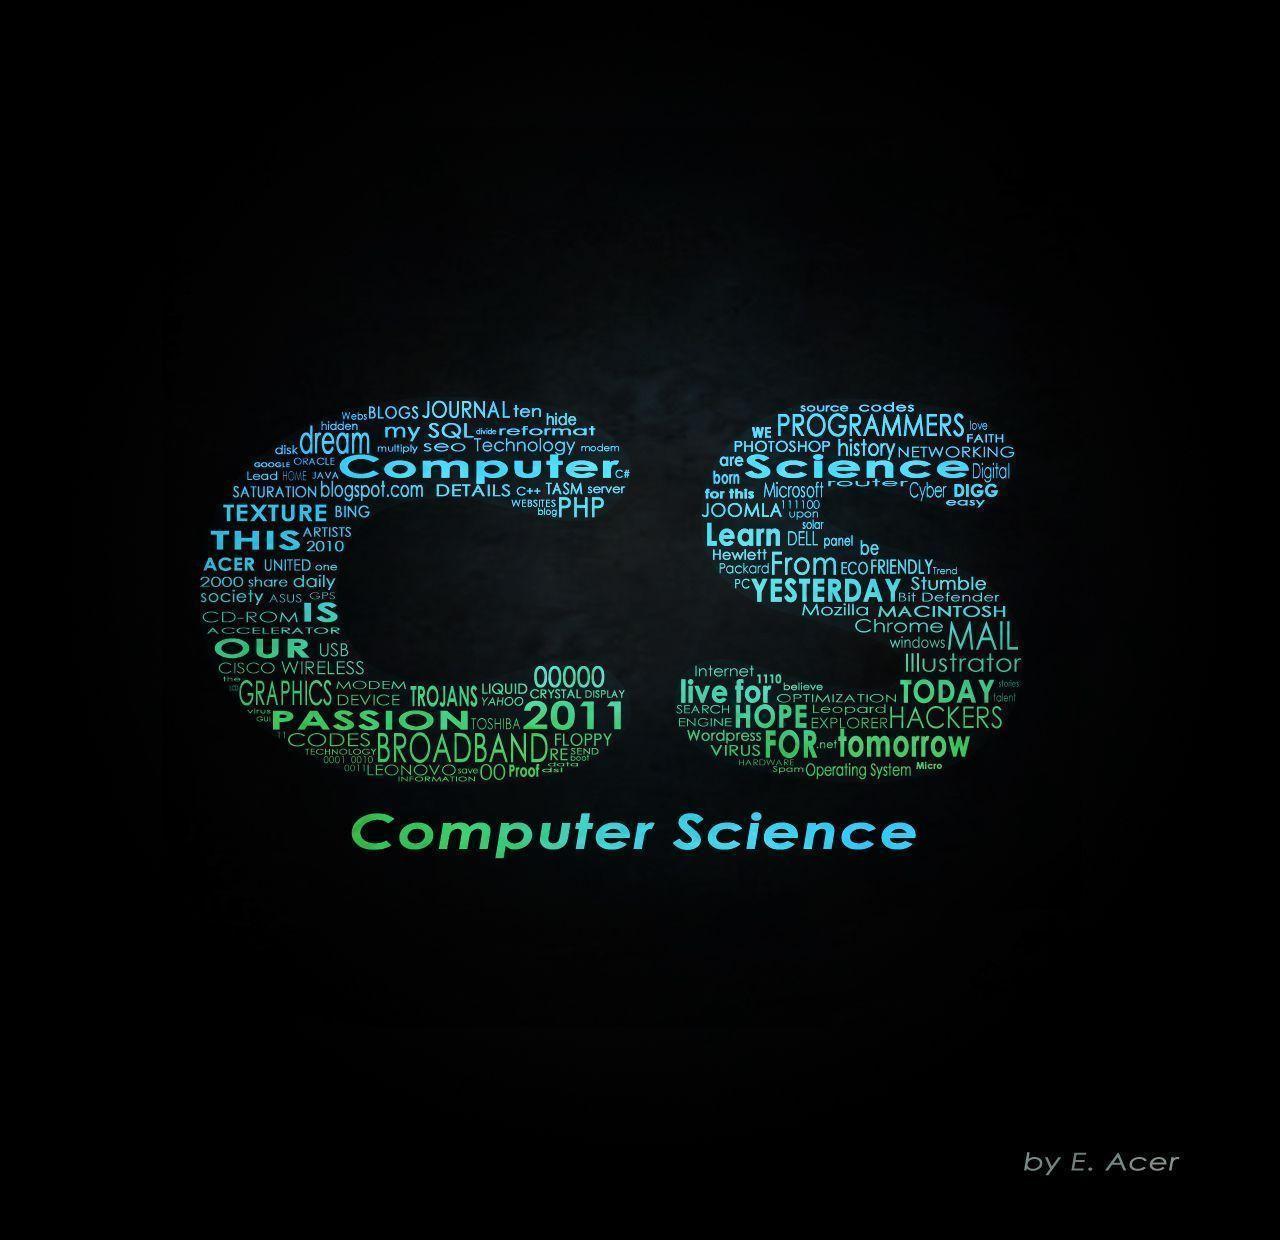 Image For > Computer Science Engineering Logo Wallpapers